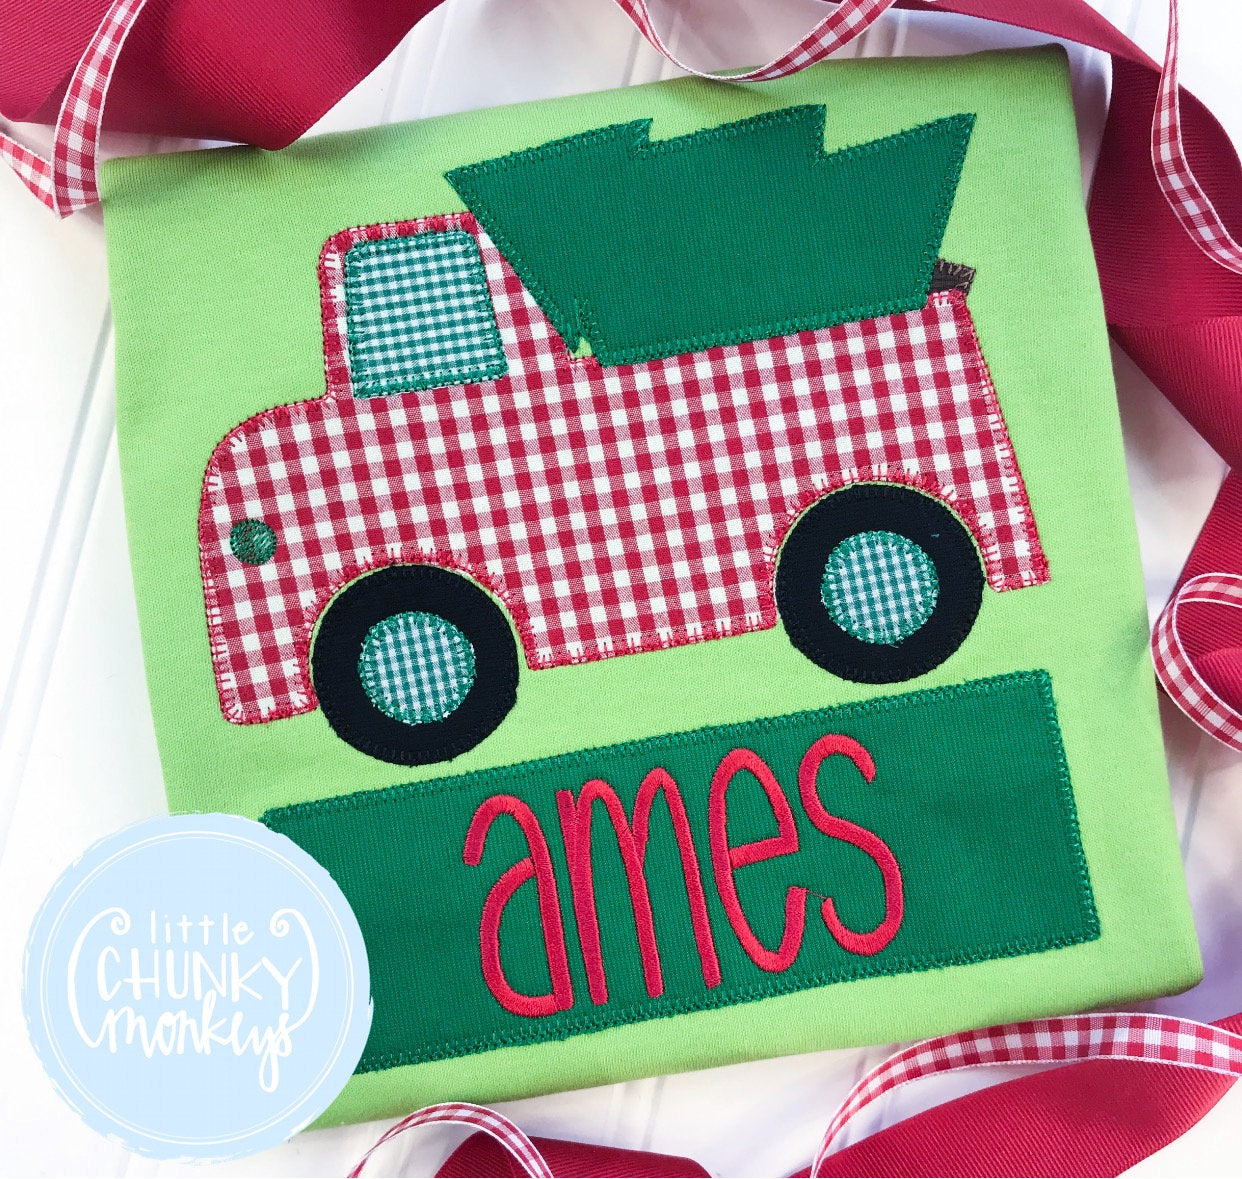 Boy Shirt - Applique Truck with Christmas Tree + Personalization